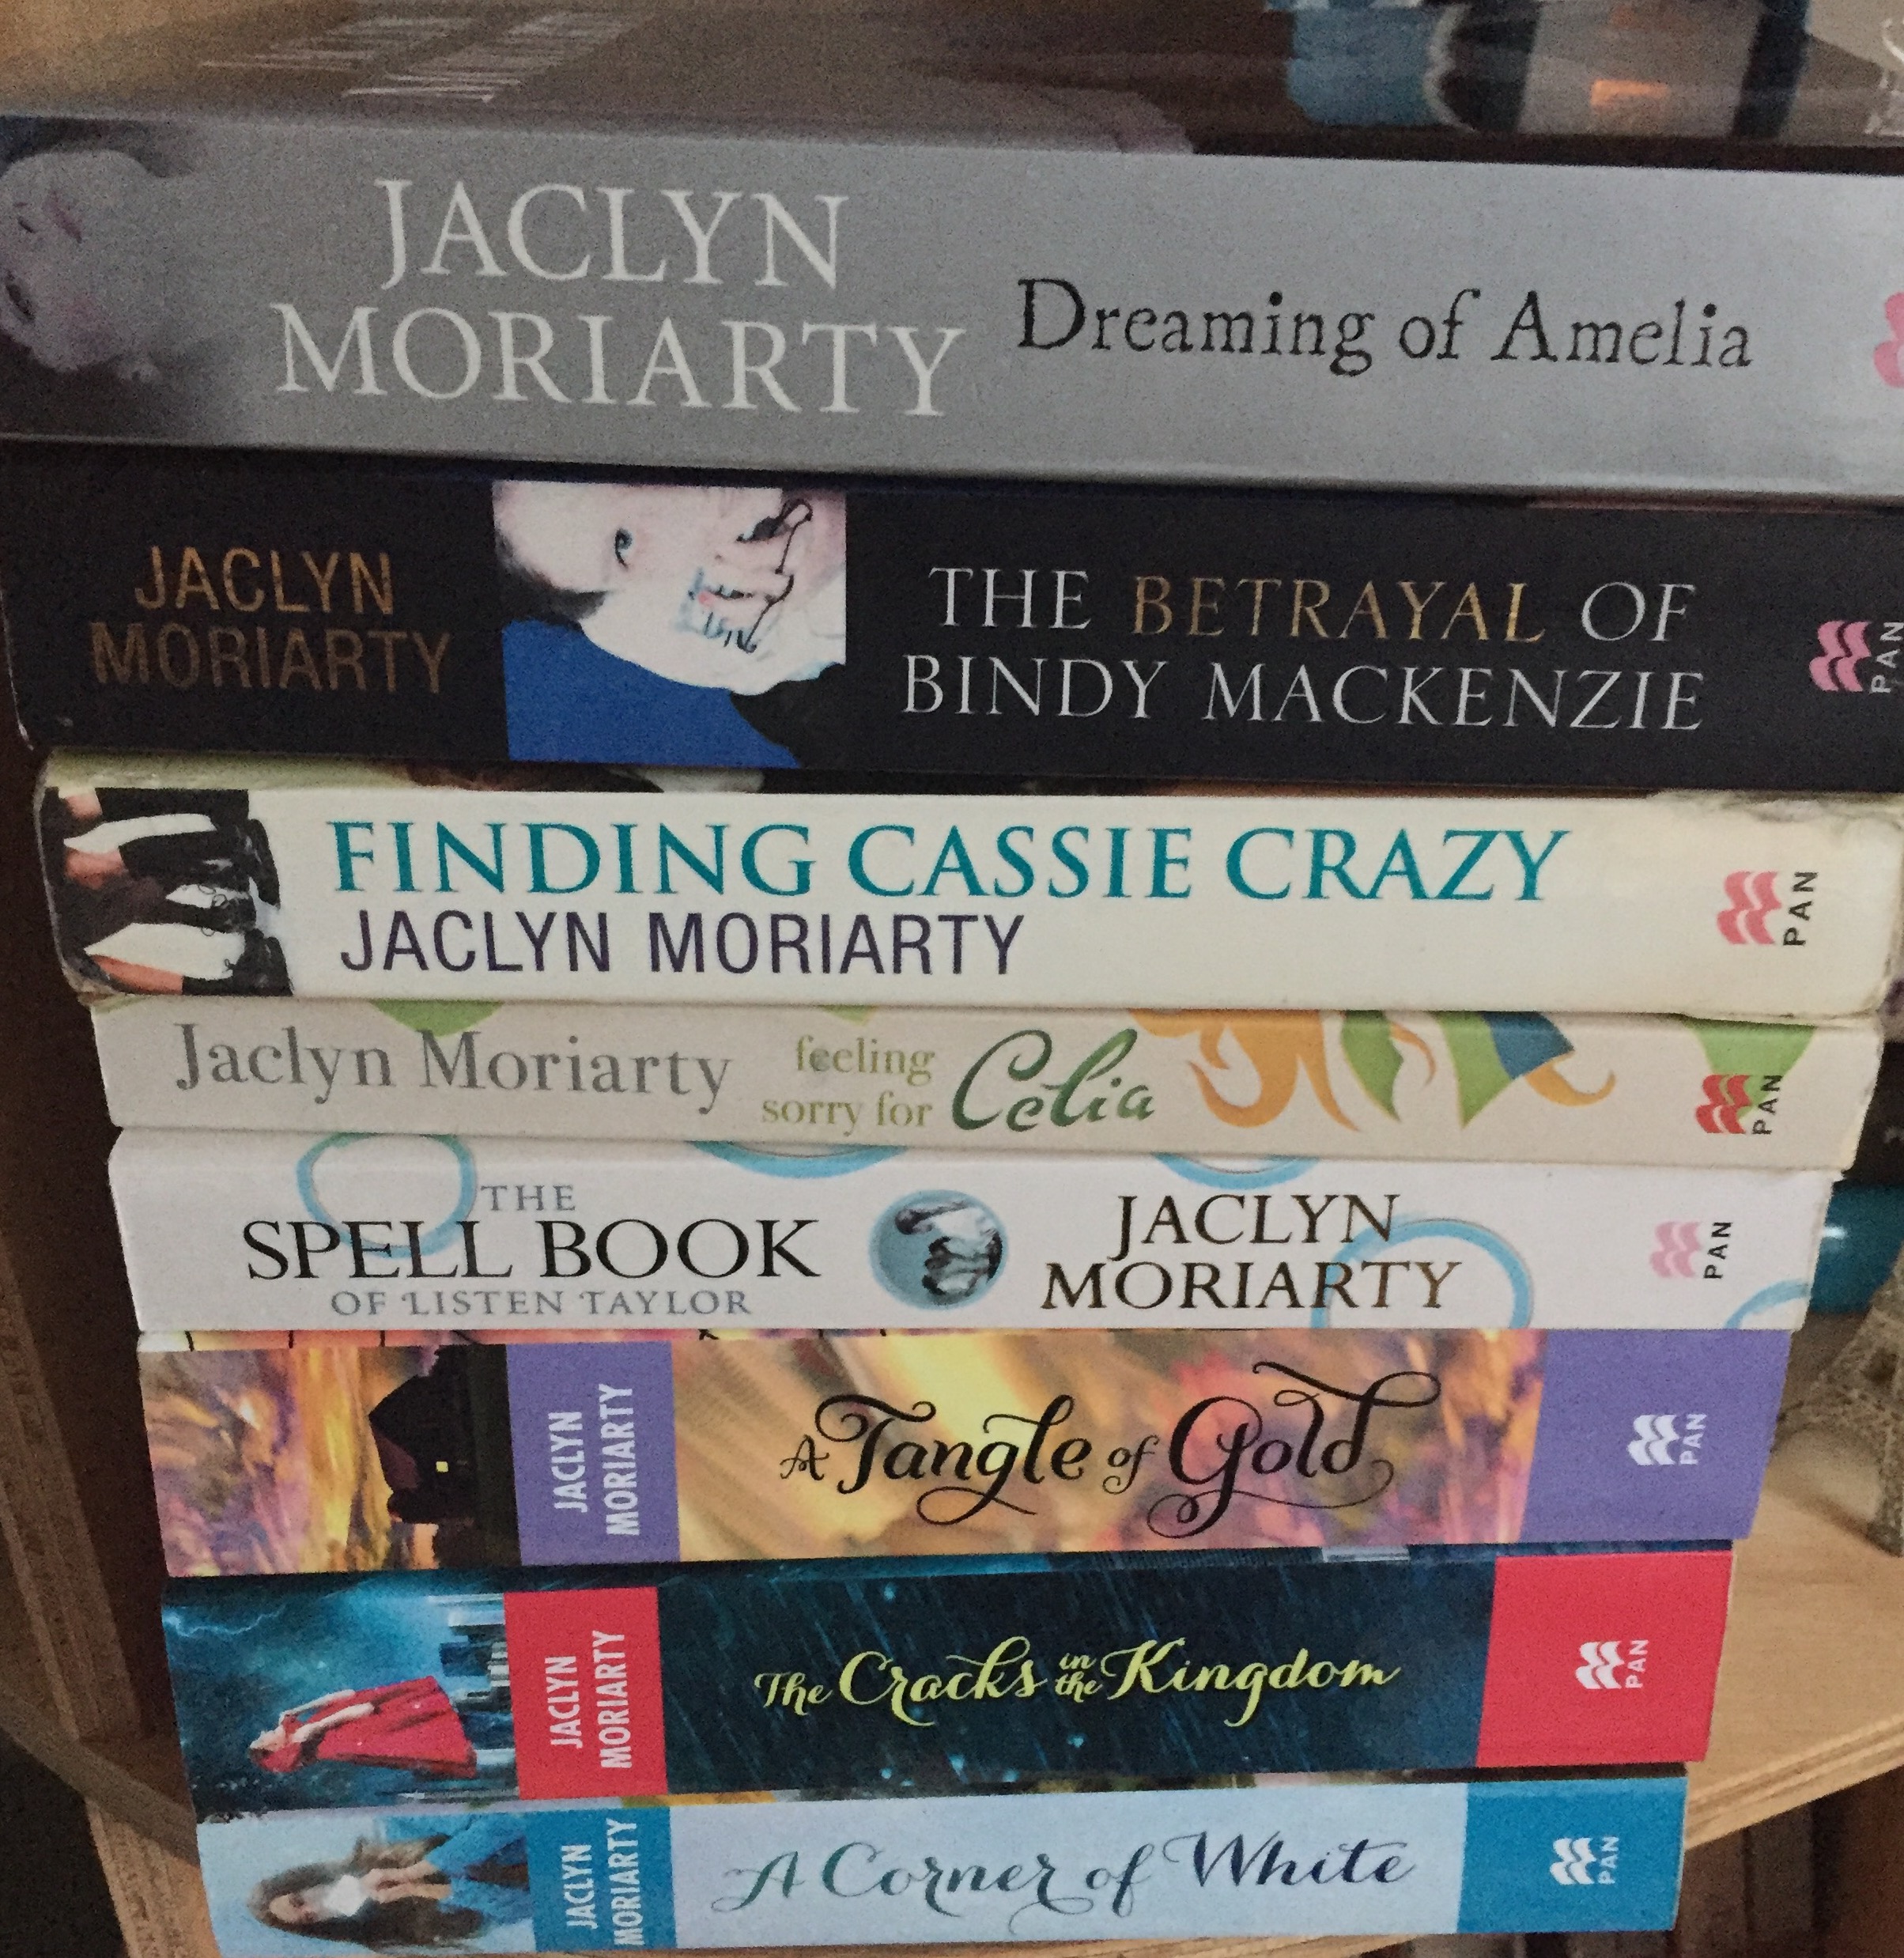 Stack of Jaclyn Moriarty books: Dreaming of Amelia, The Betrayal of Bindi Mackenzie, Finding Cassie Crazy, Feeling Sorry for Celia, The Spell Book of Listen Taylor, A Tangle of Gold, The Cracks in the Kingdom, a Corner of White